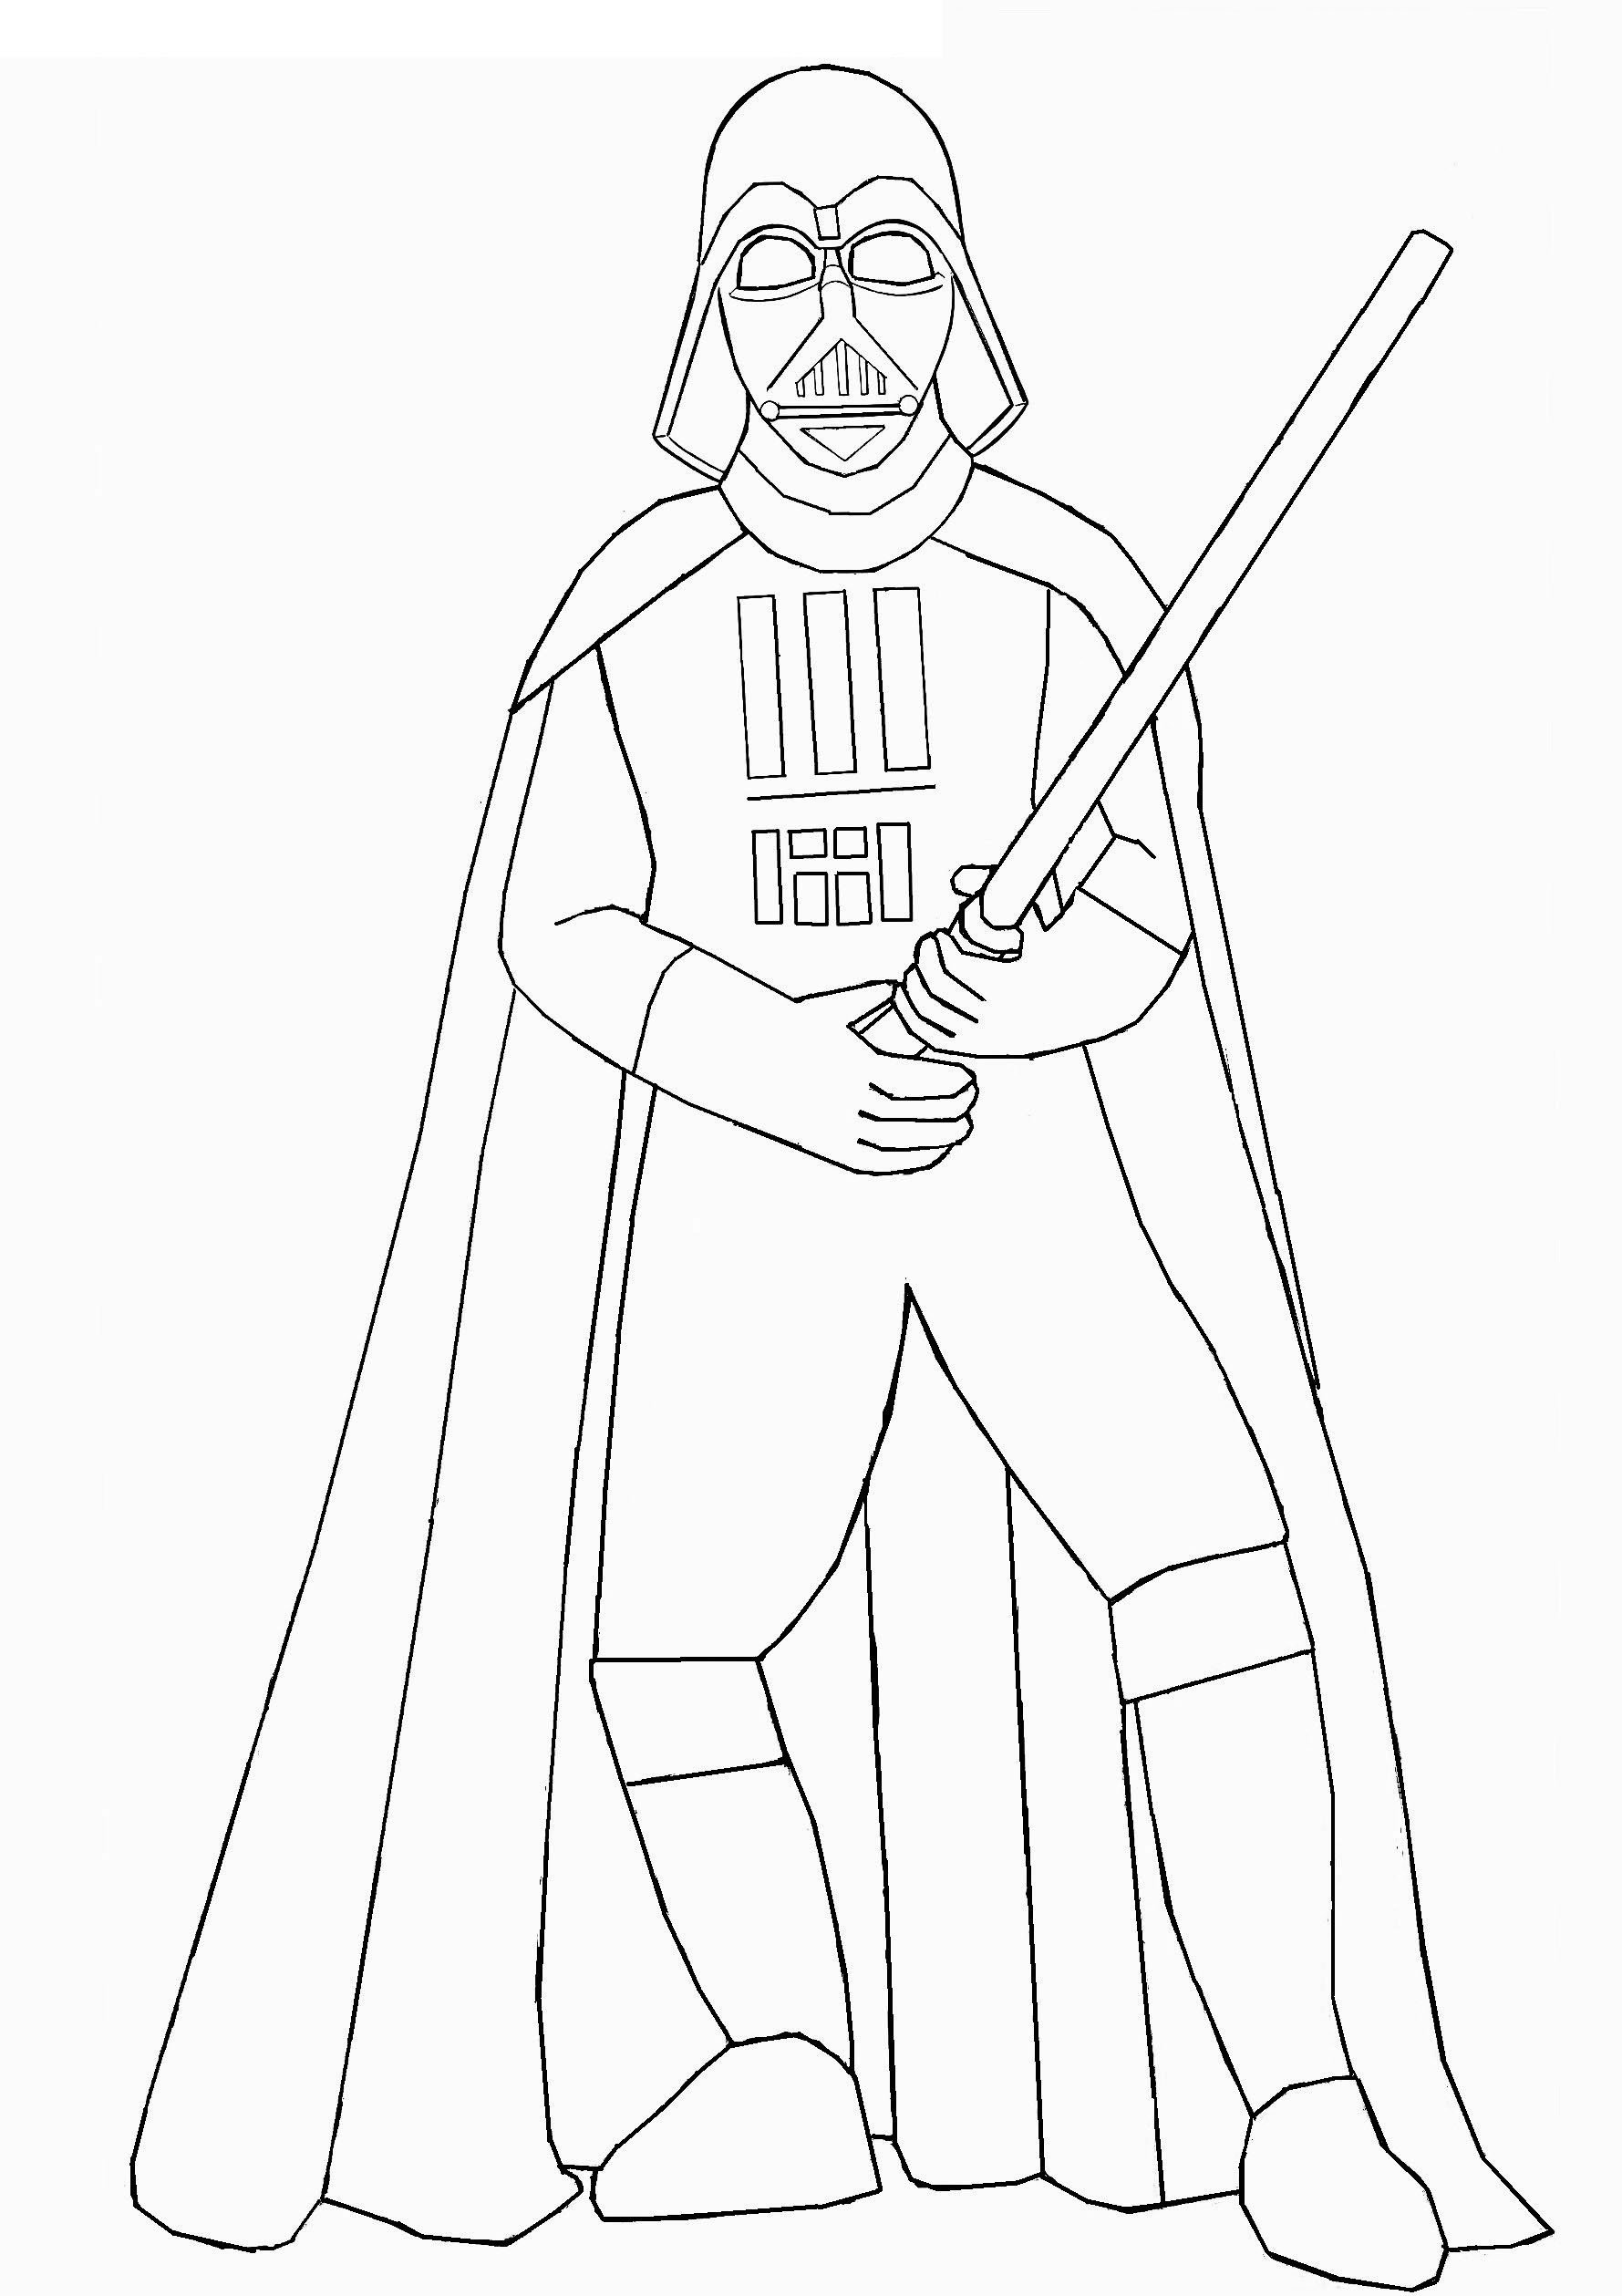 Lightsaber coloring pages